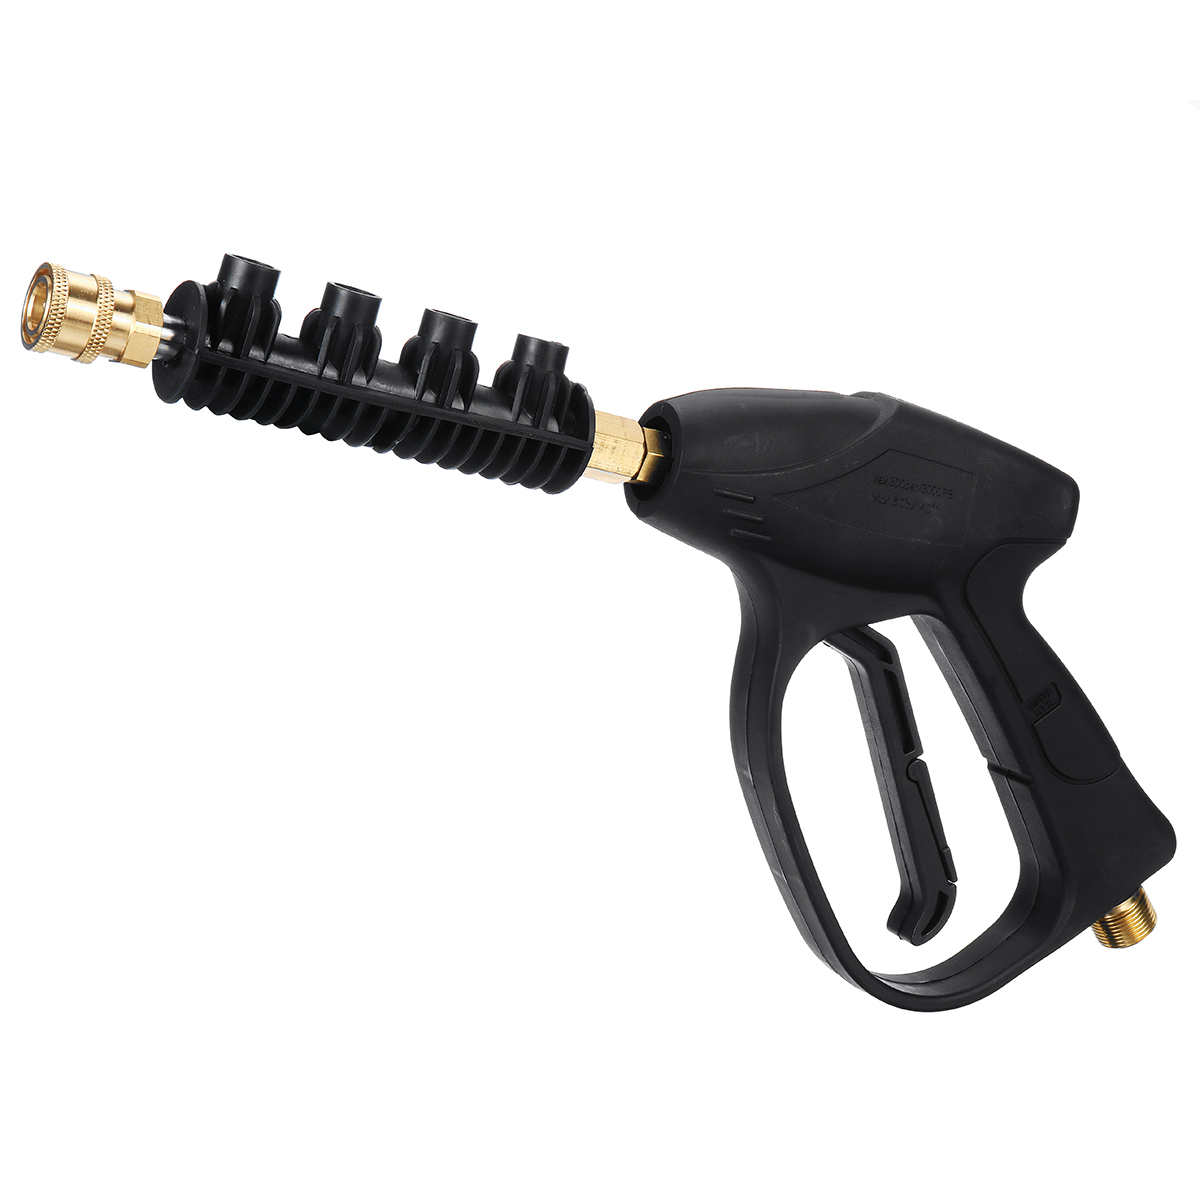 Universal Car High Pressure Power Washer Trigger 300 Bar/3000Psi with 5 Color Nozzles Tips Cleaning